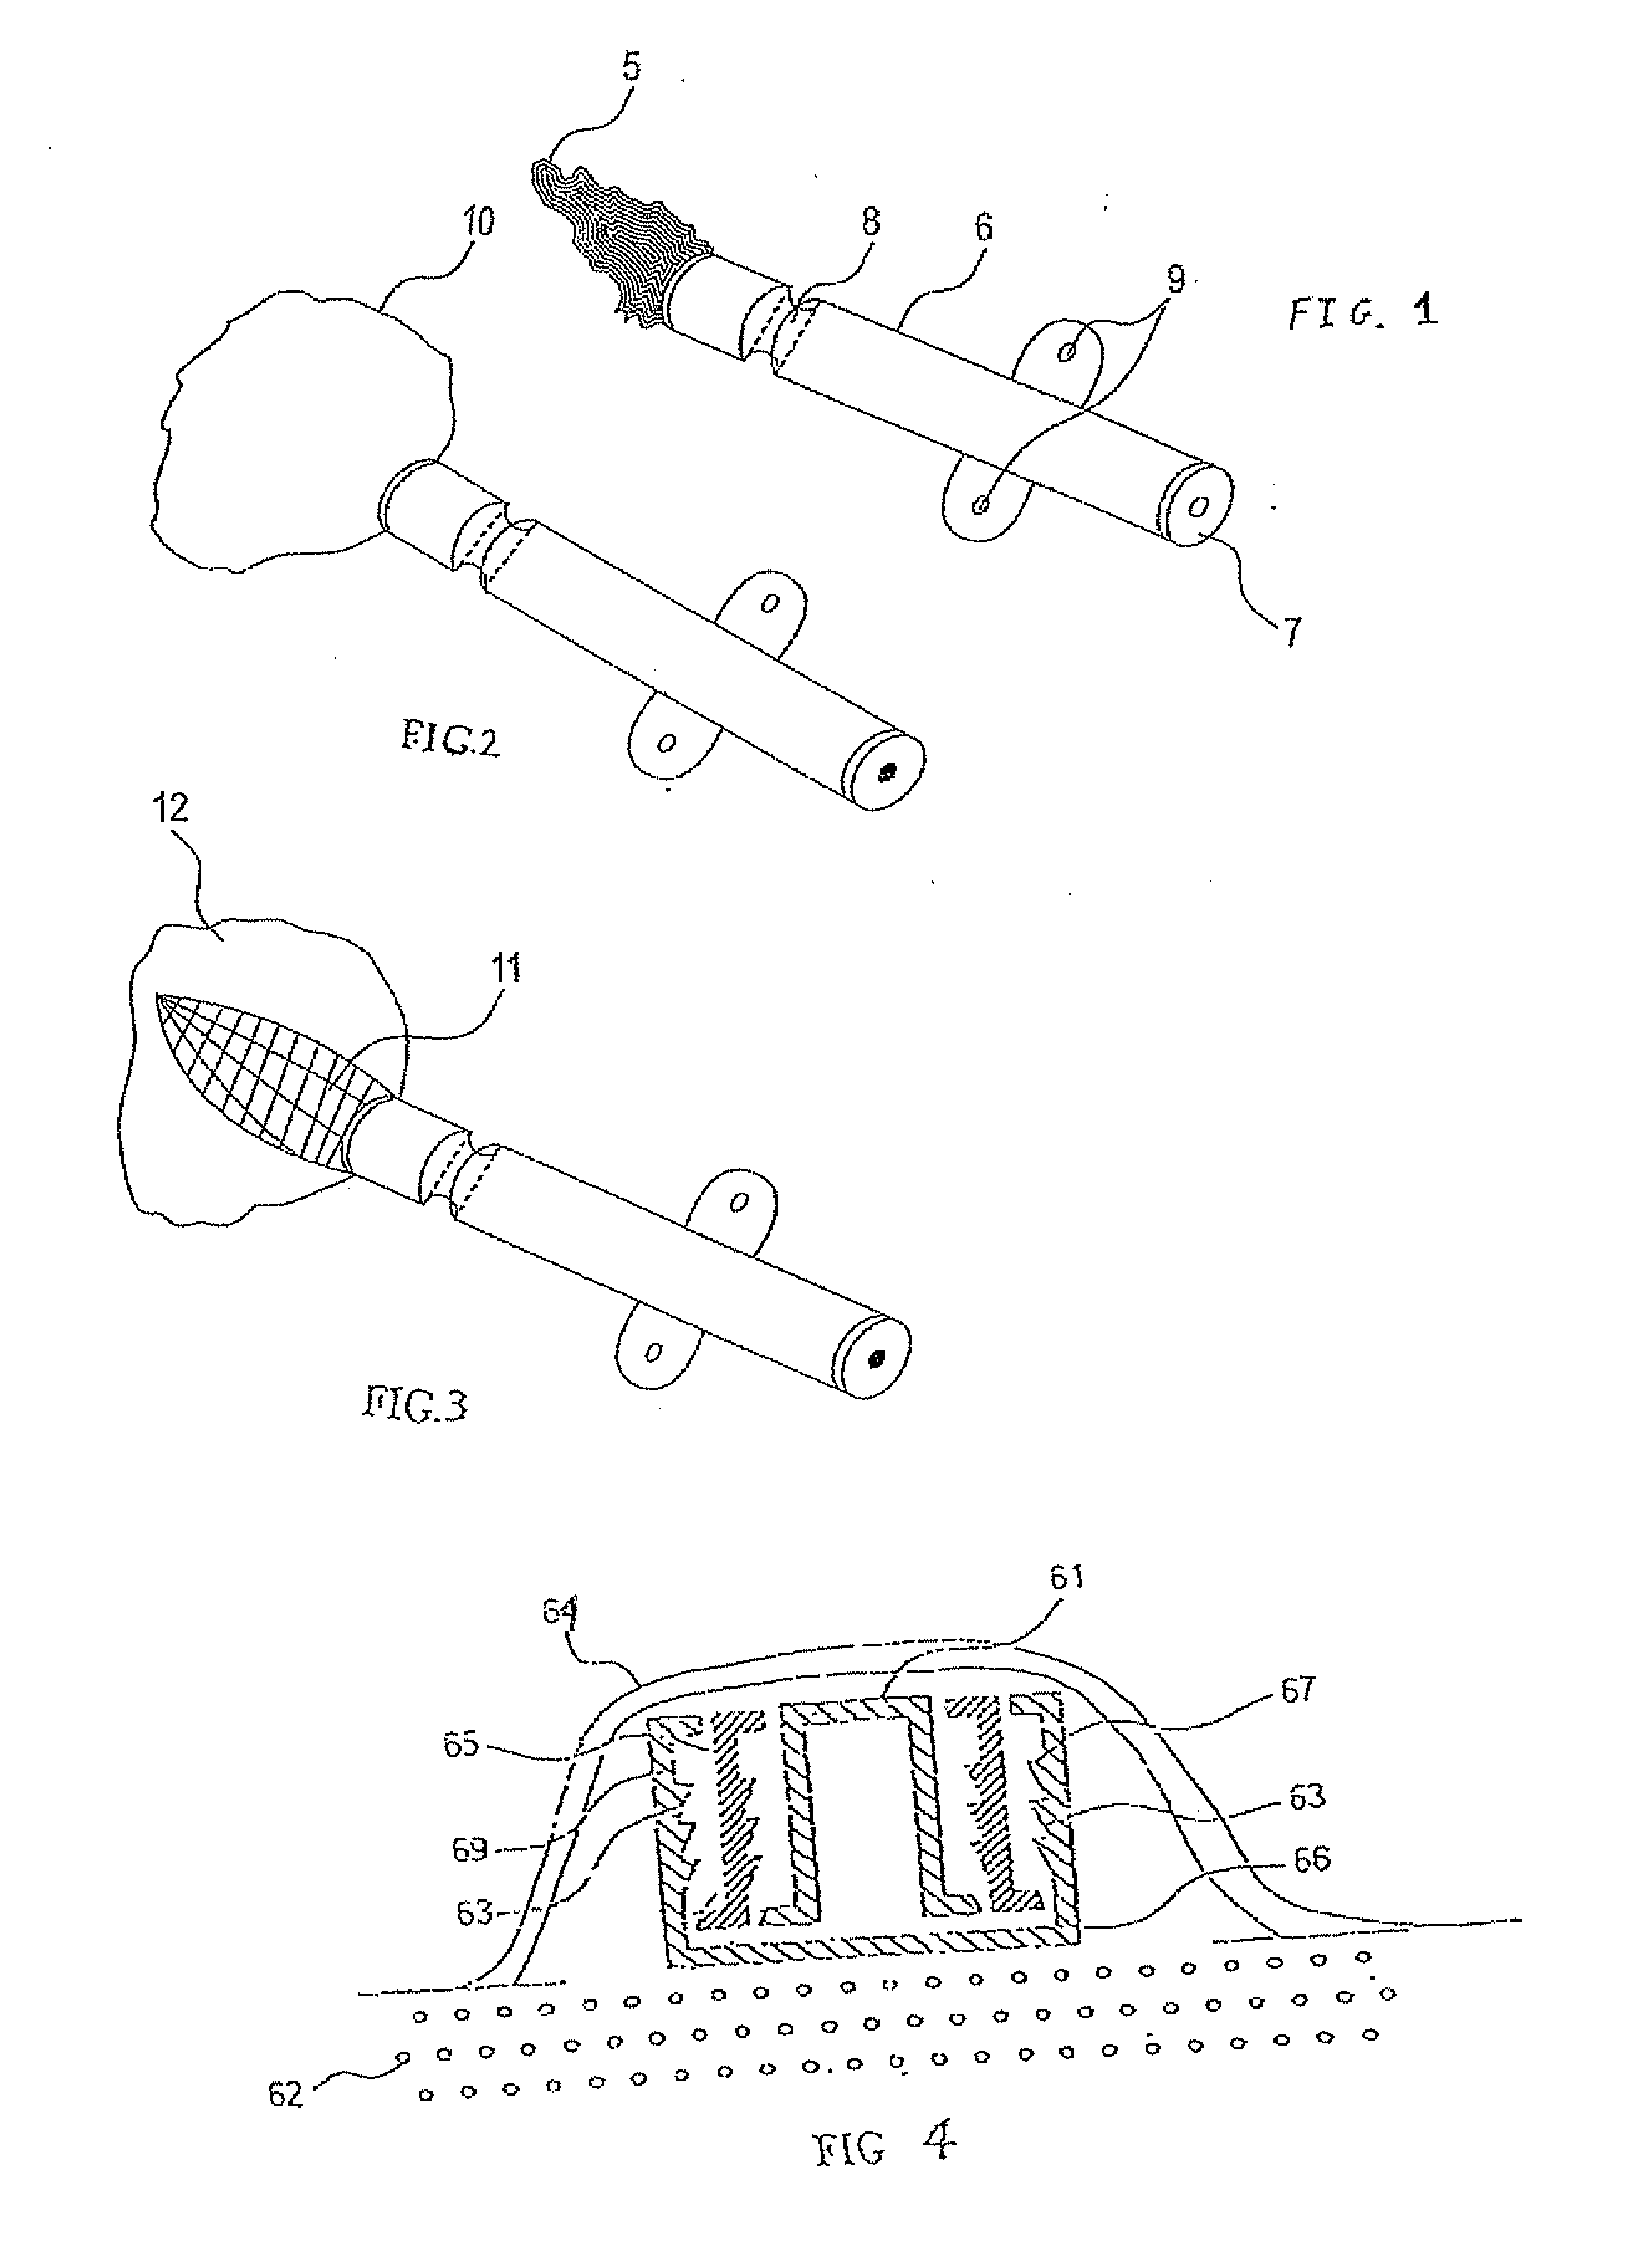 Expandable devices and methods for tissue expansion, regeneration and fixation